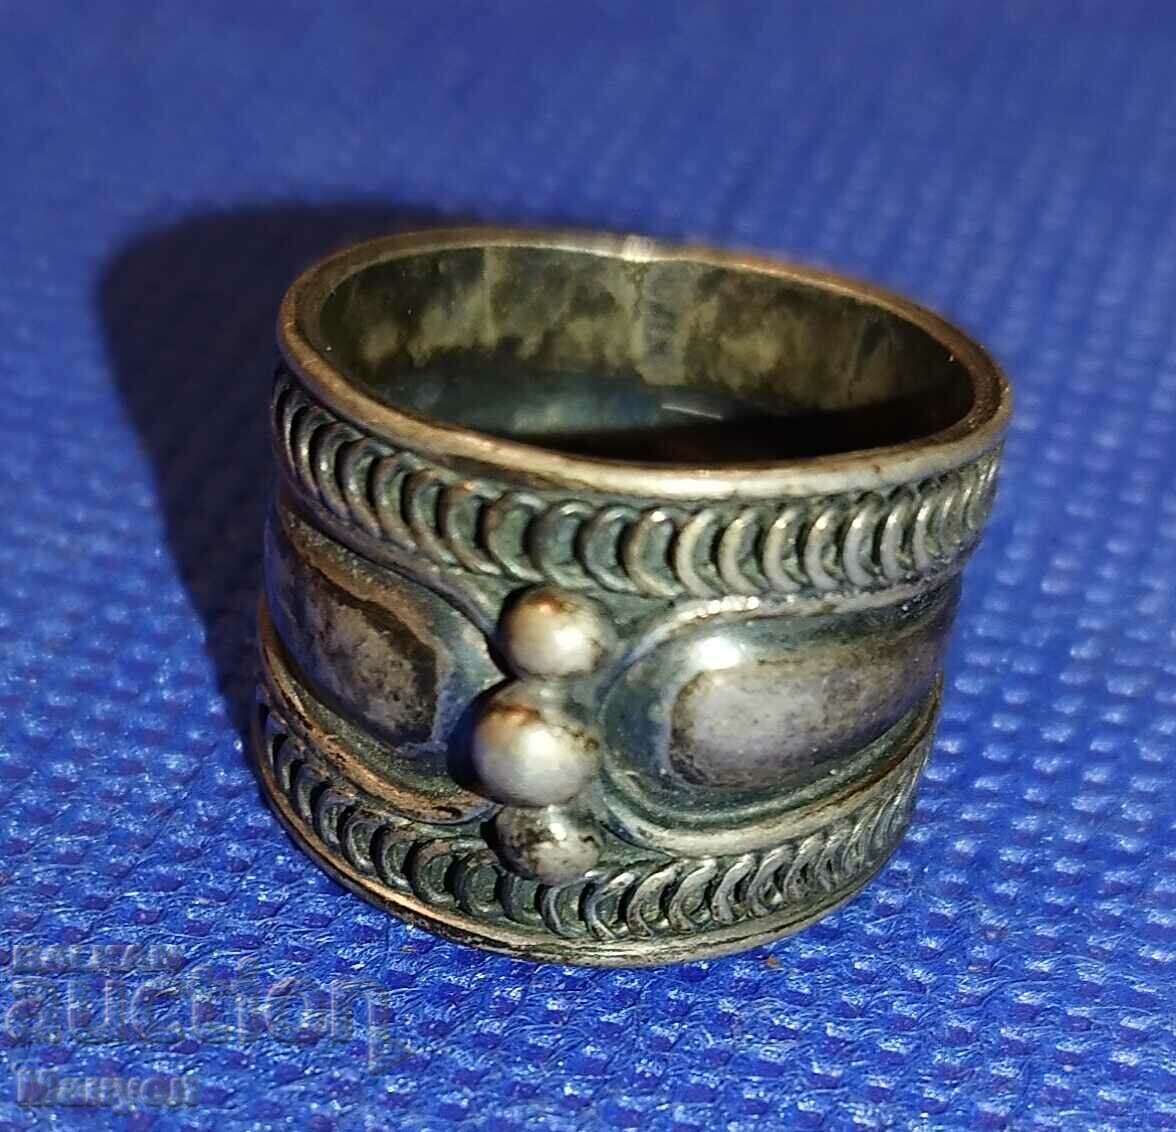 An old silver ring.